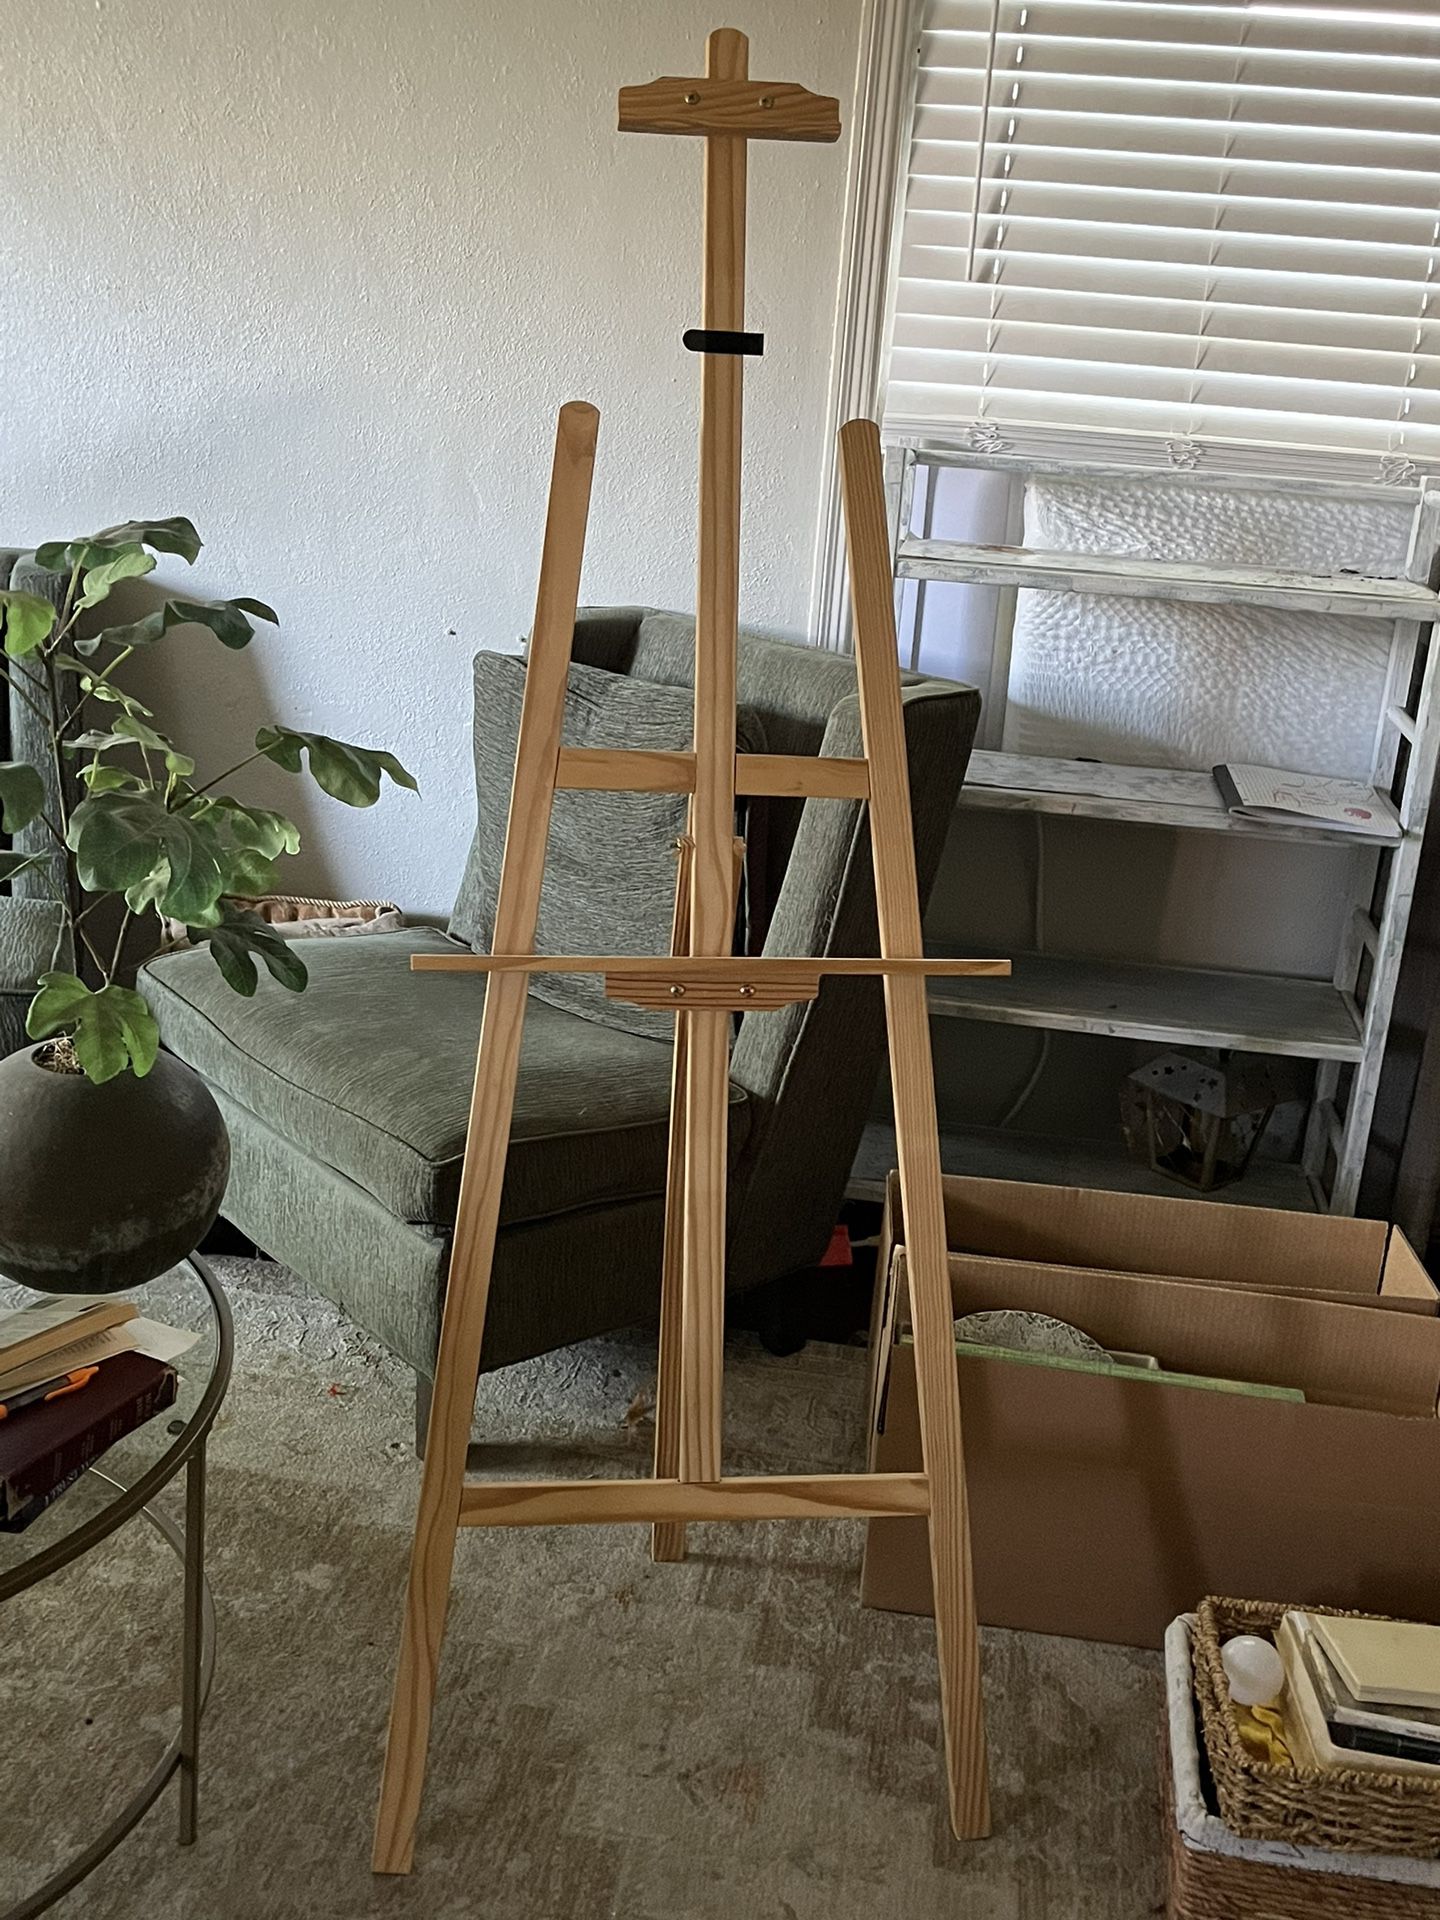 Painting Easel